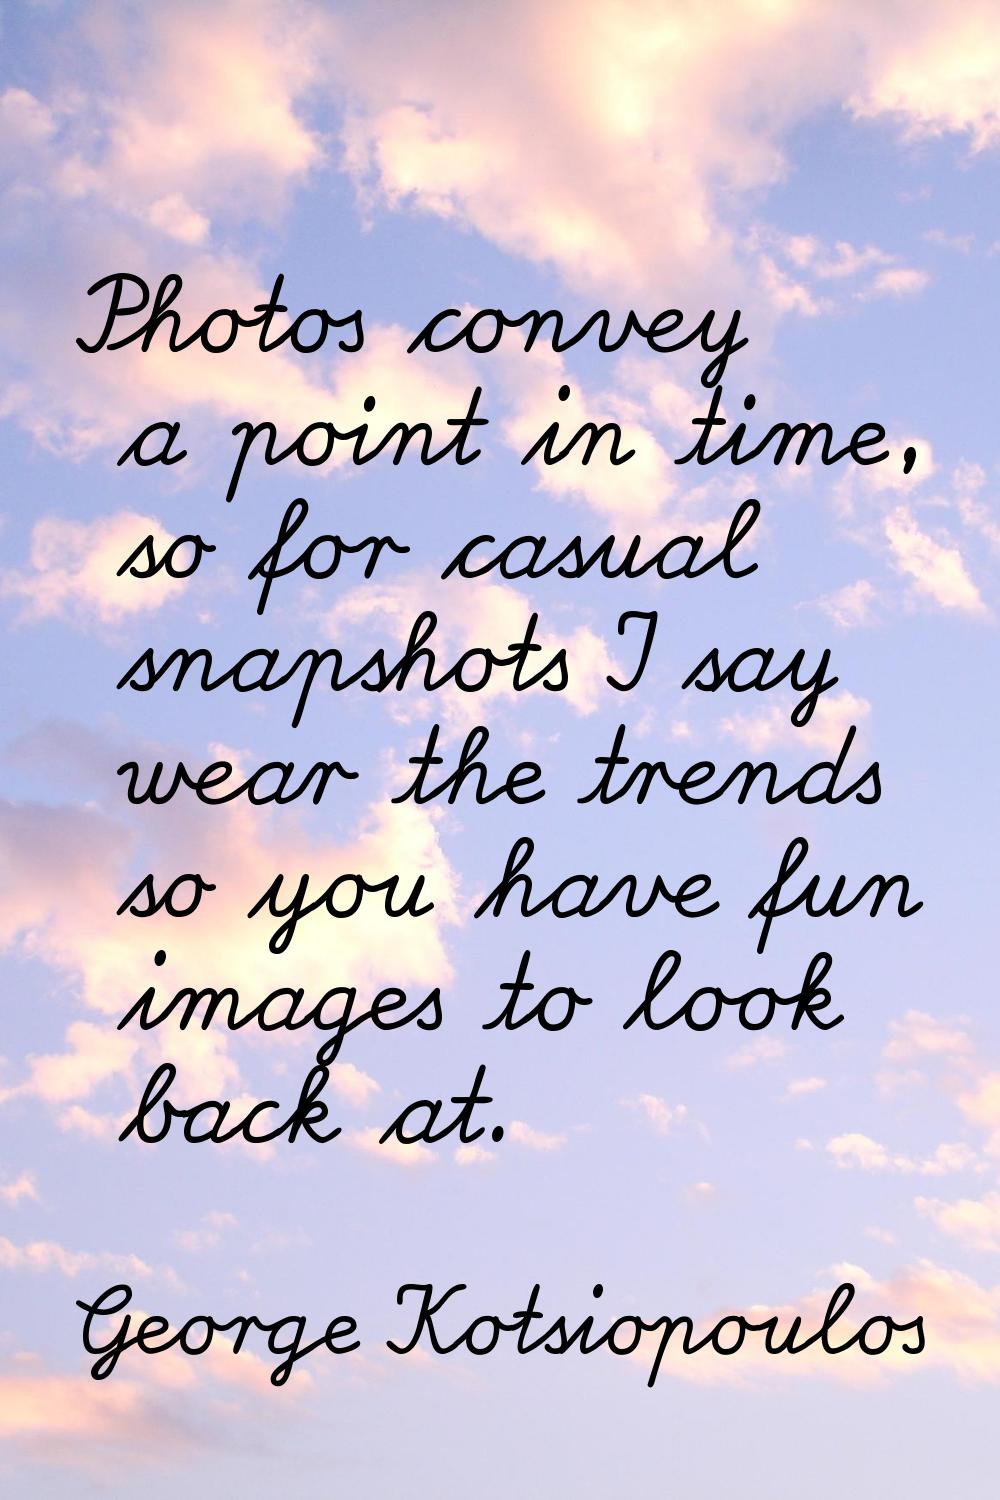 Photos convey a point in time, so for casual snapshots I say wear the trends so you have fun images